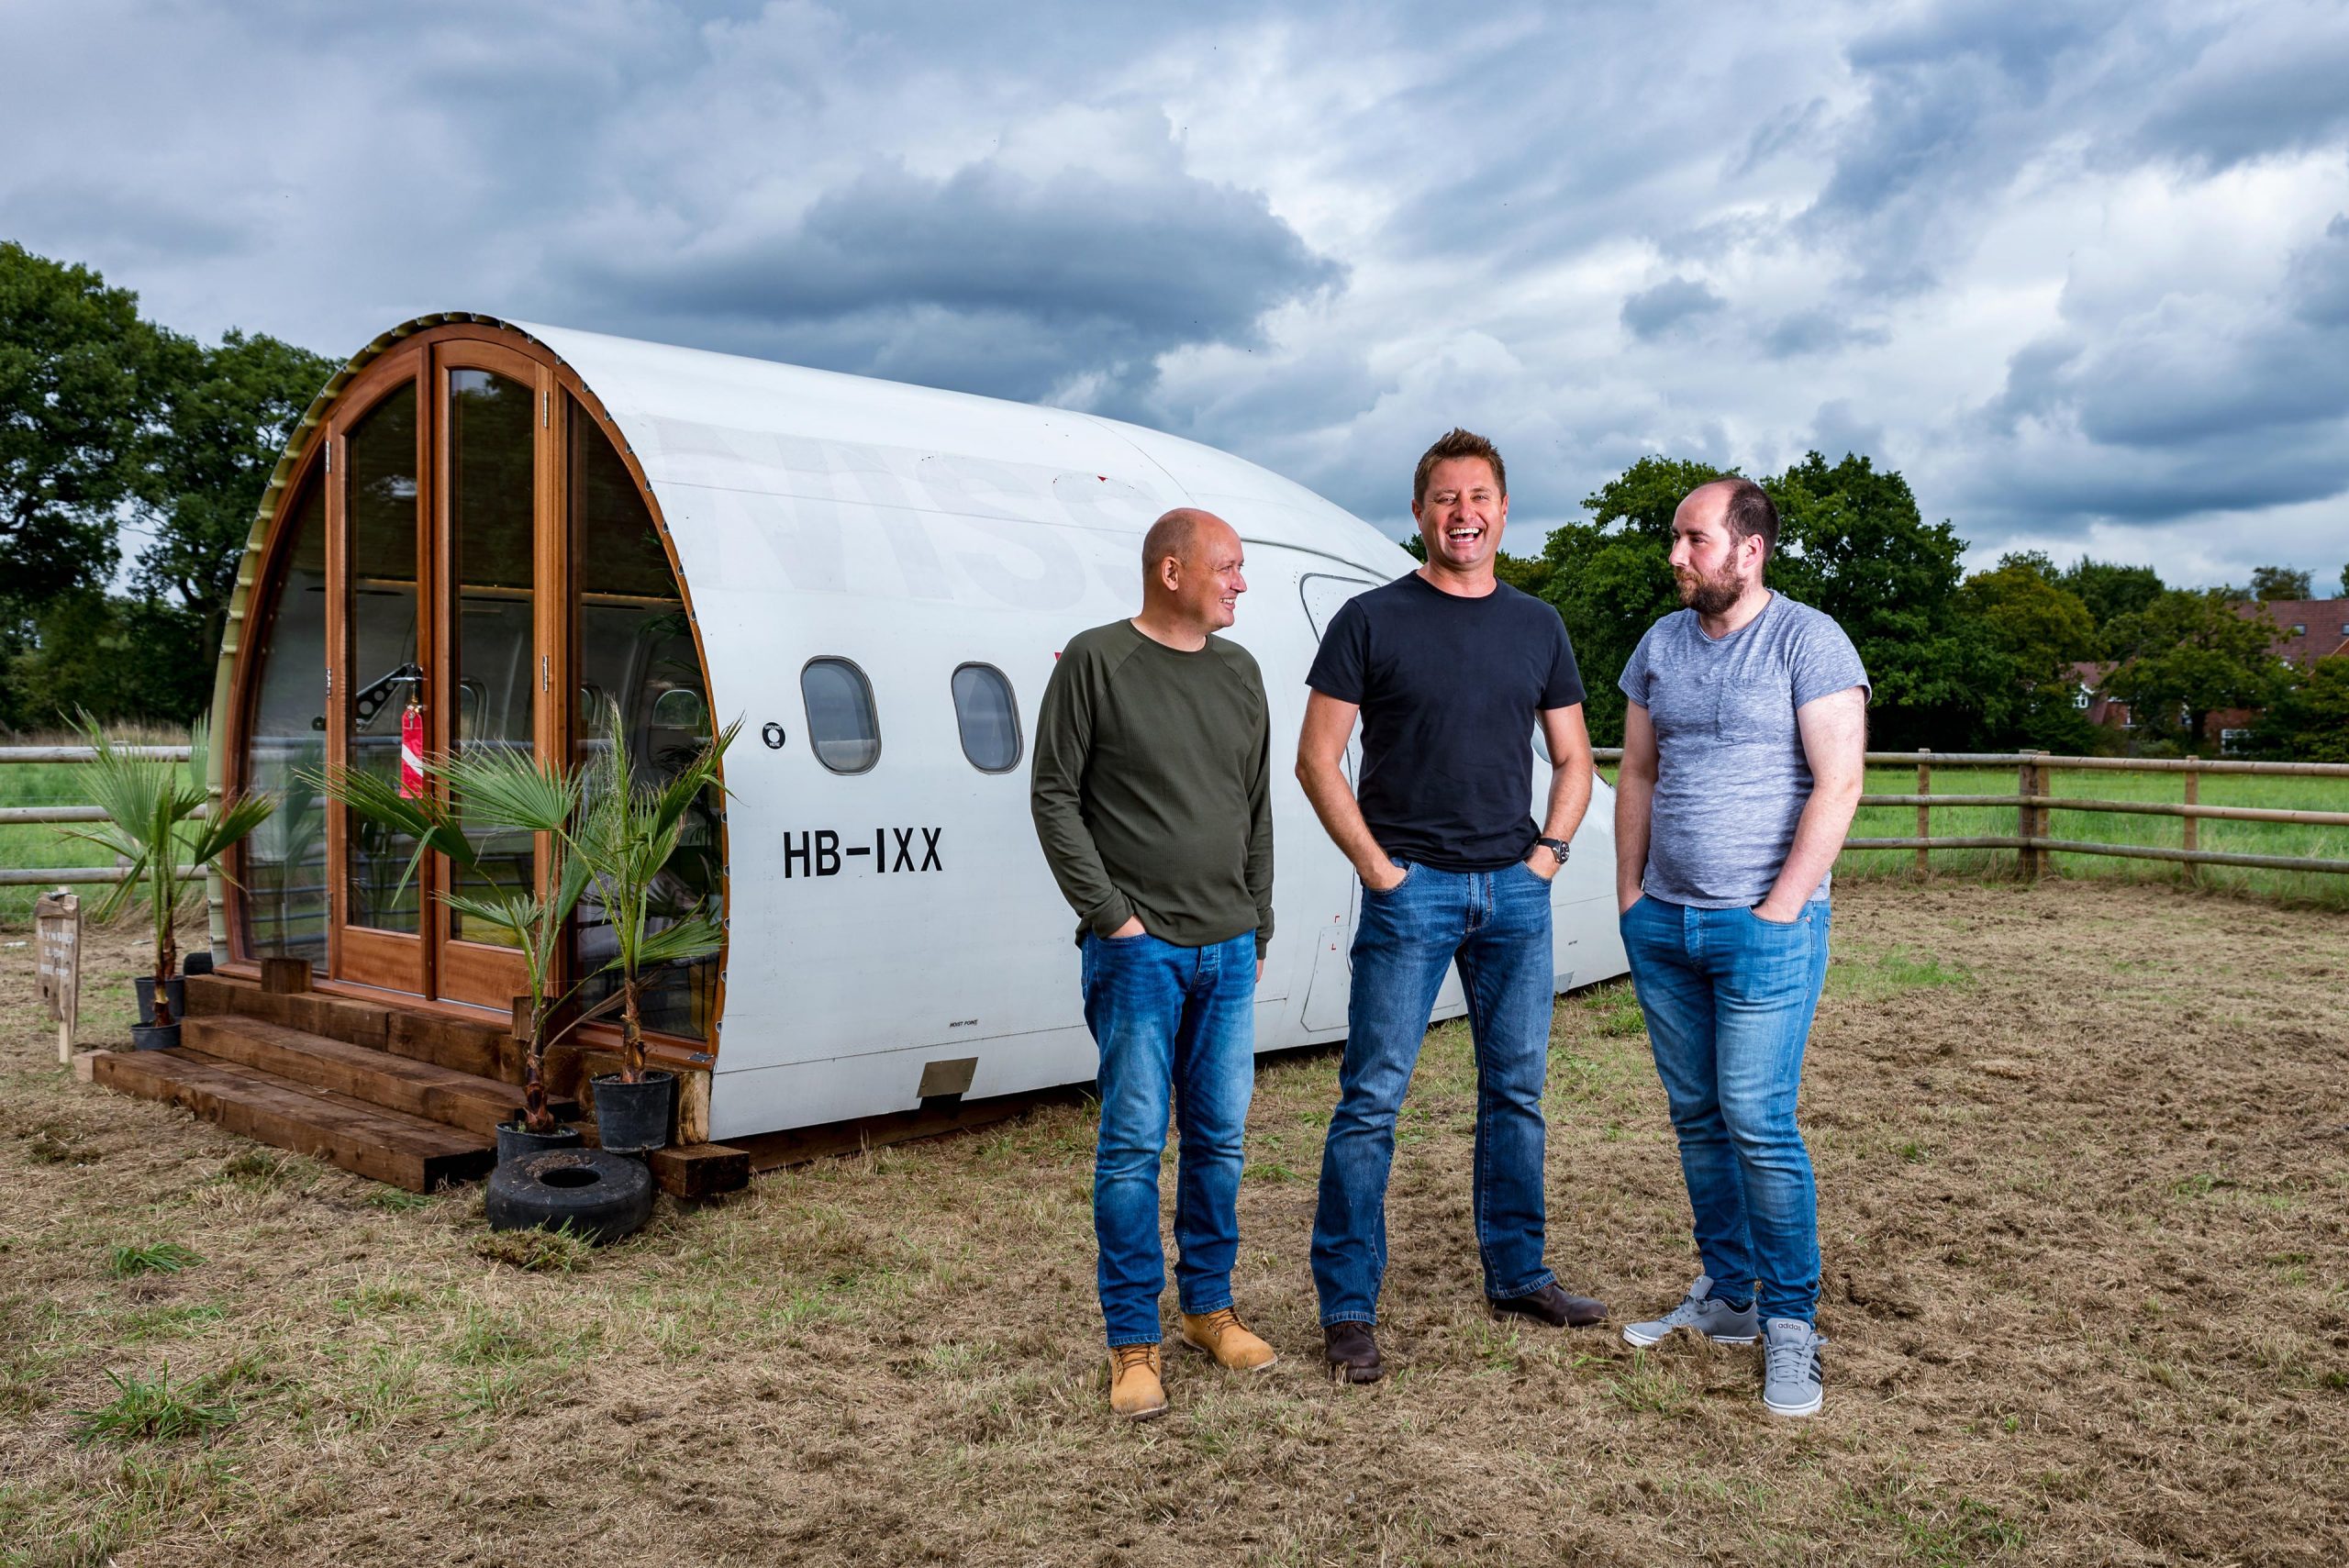 George Clarke and two other males captured during a stills unit shoot for Channel 4's Amazing Spaces, photographed by Wright Content, a TV personality photographer in London.